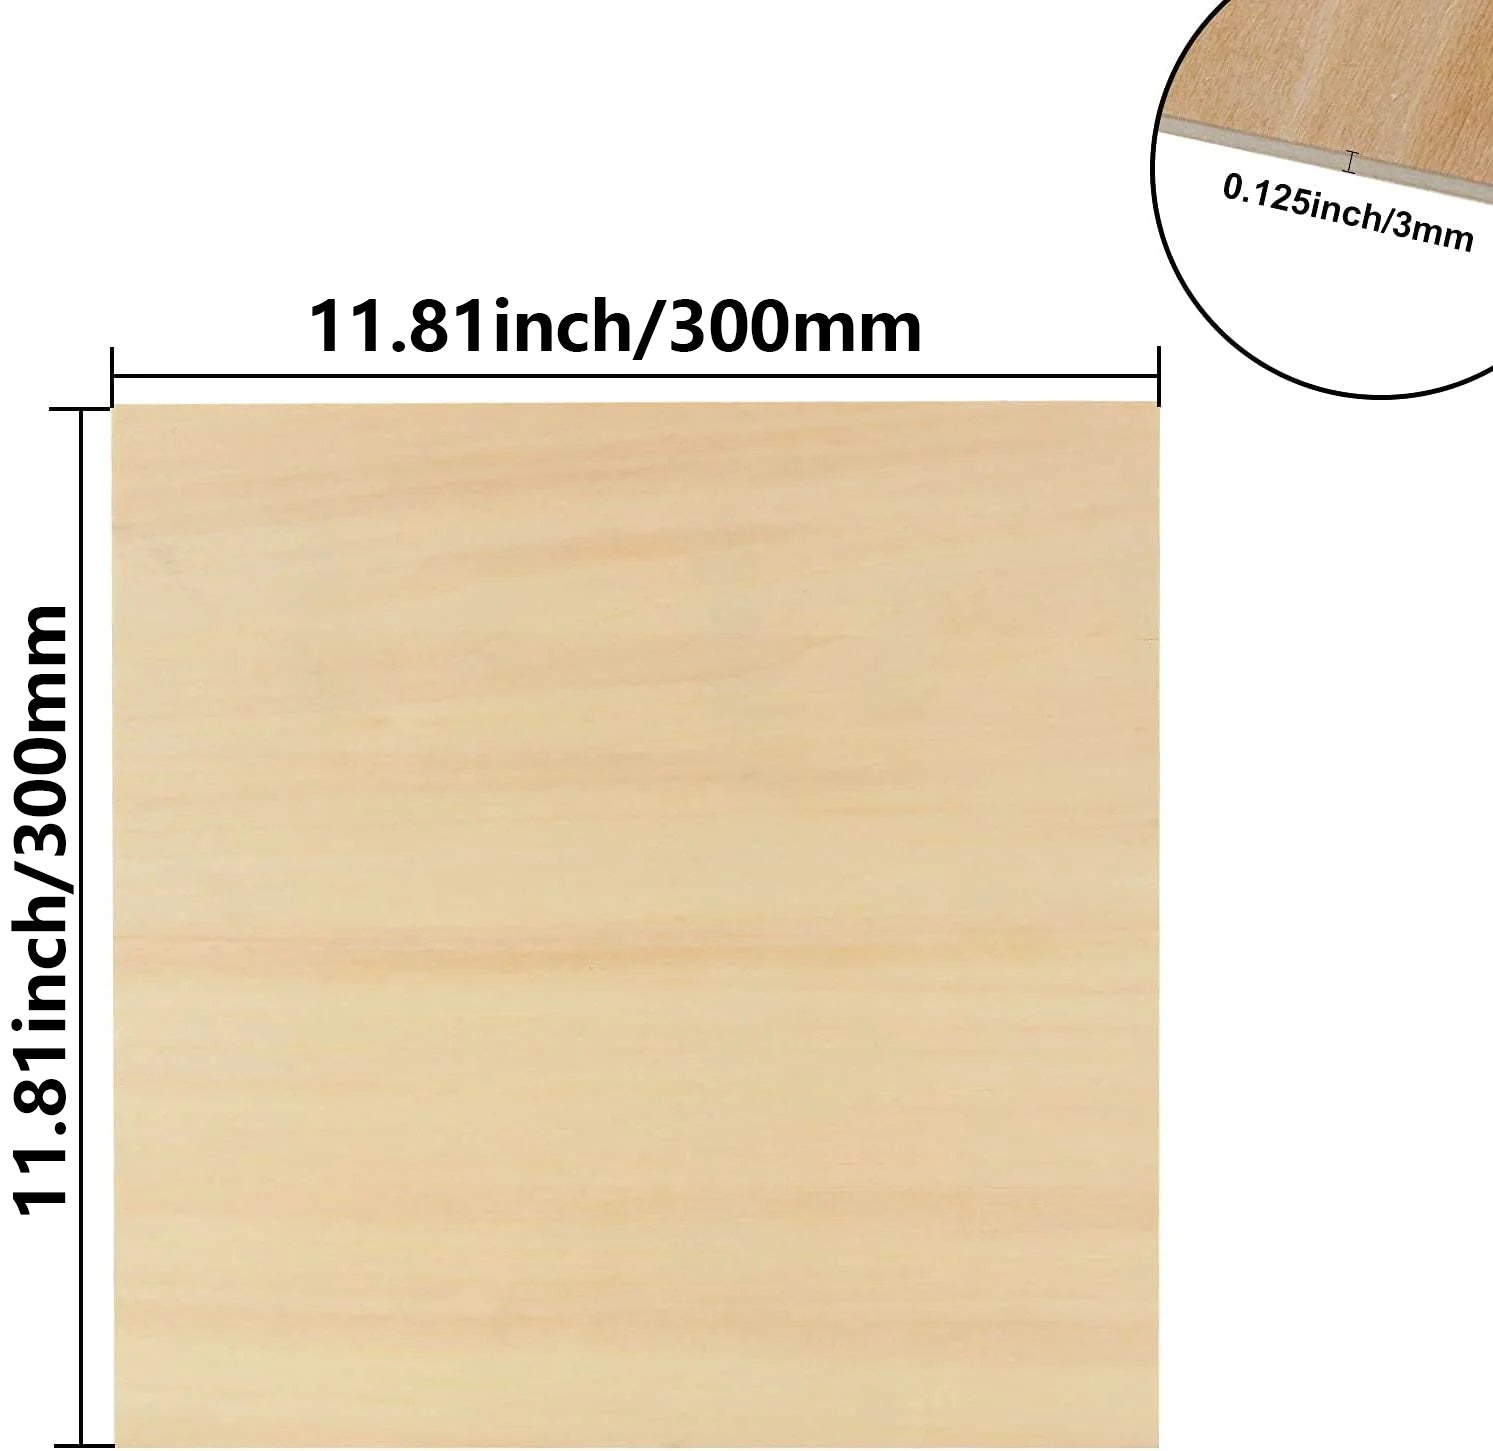 Veneered Wood Sheets for laser engraving and cutting